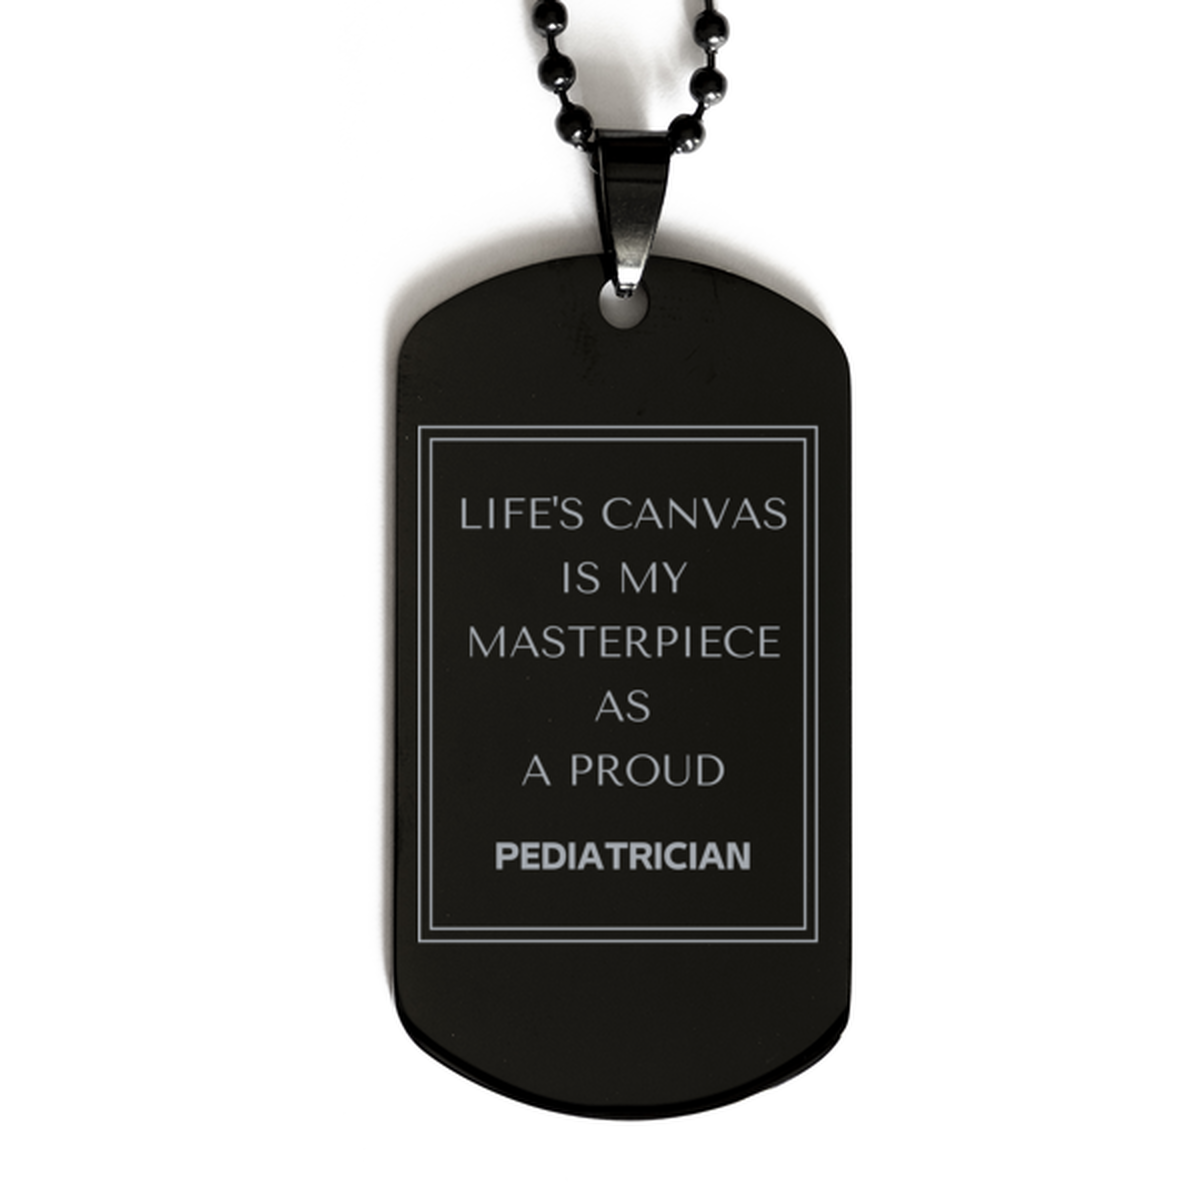 Proud Pediatrician Gifts, Life's canvas is my masterpiece, Epic Birthday Christmas Unique Black Dog Tag For Pediatrician, Coworkers, Men, Women, Friends